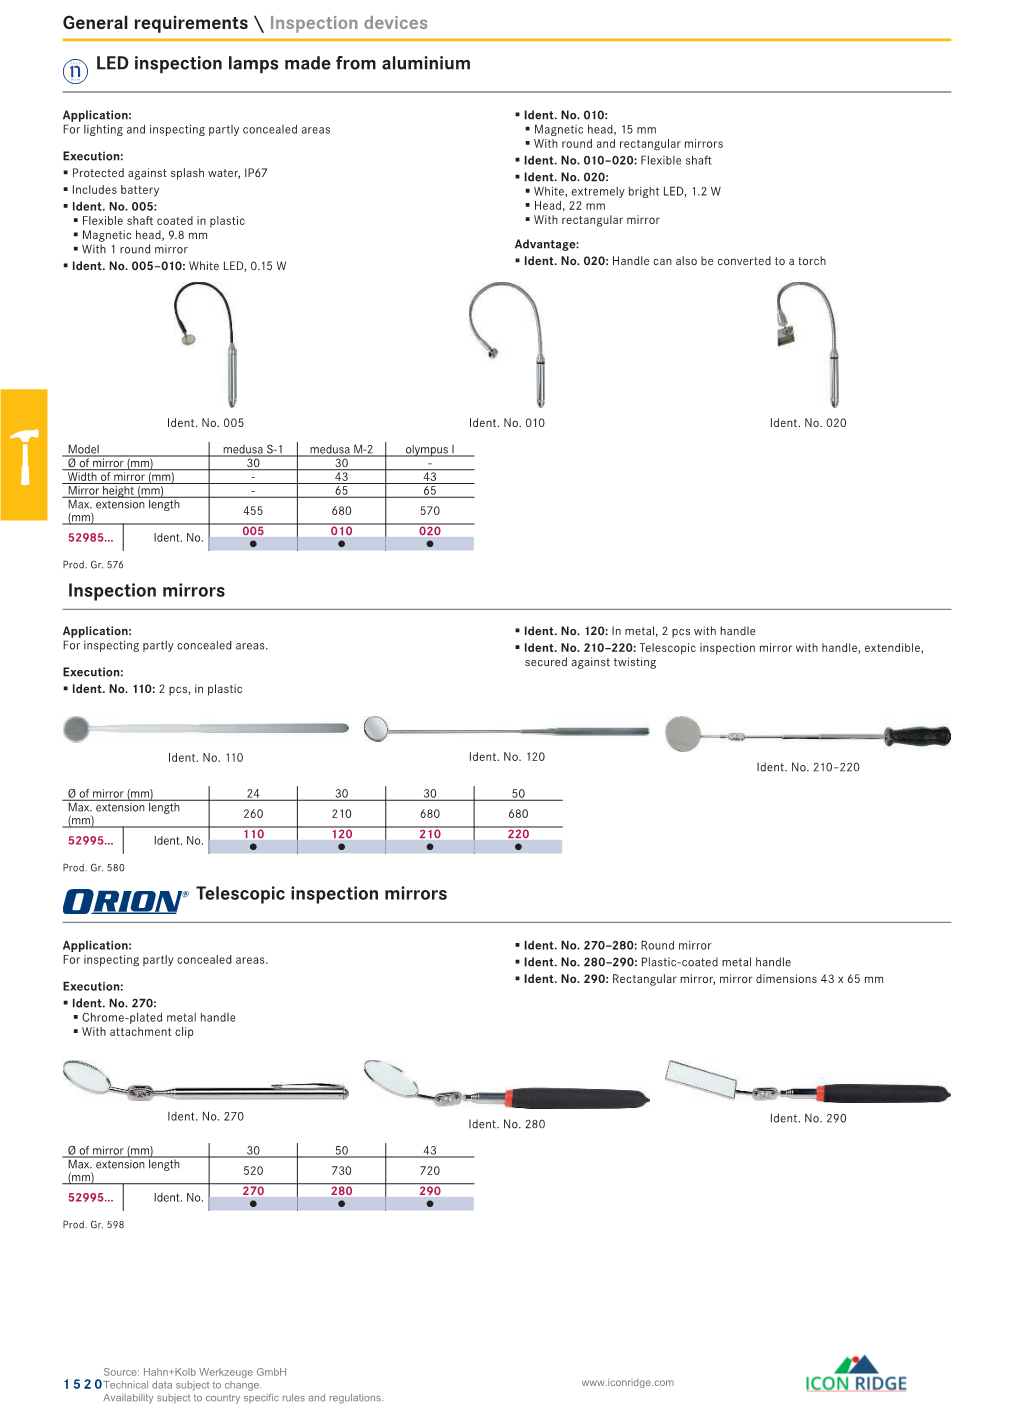 General Requirements \ Inspection Devices LED Inspection Lamps